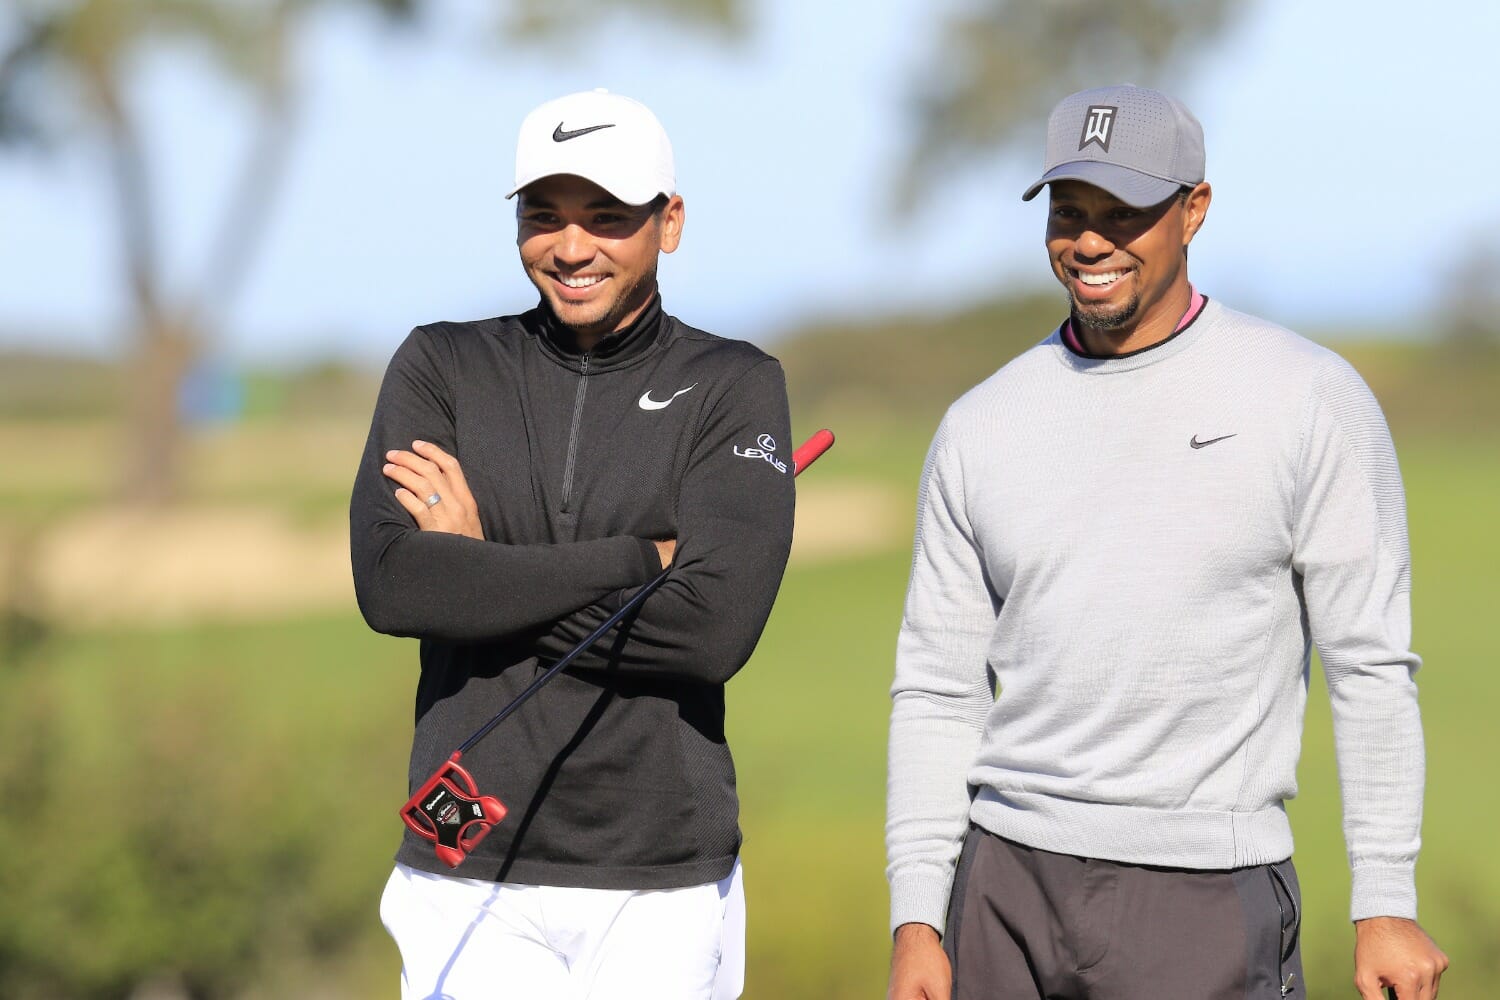 Torrey Pines Cuts Day, DJ and Woods Down To Size.